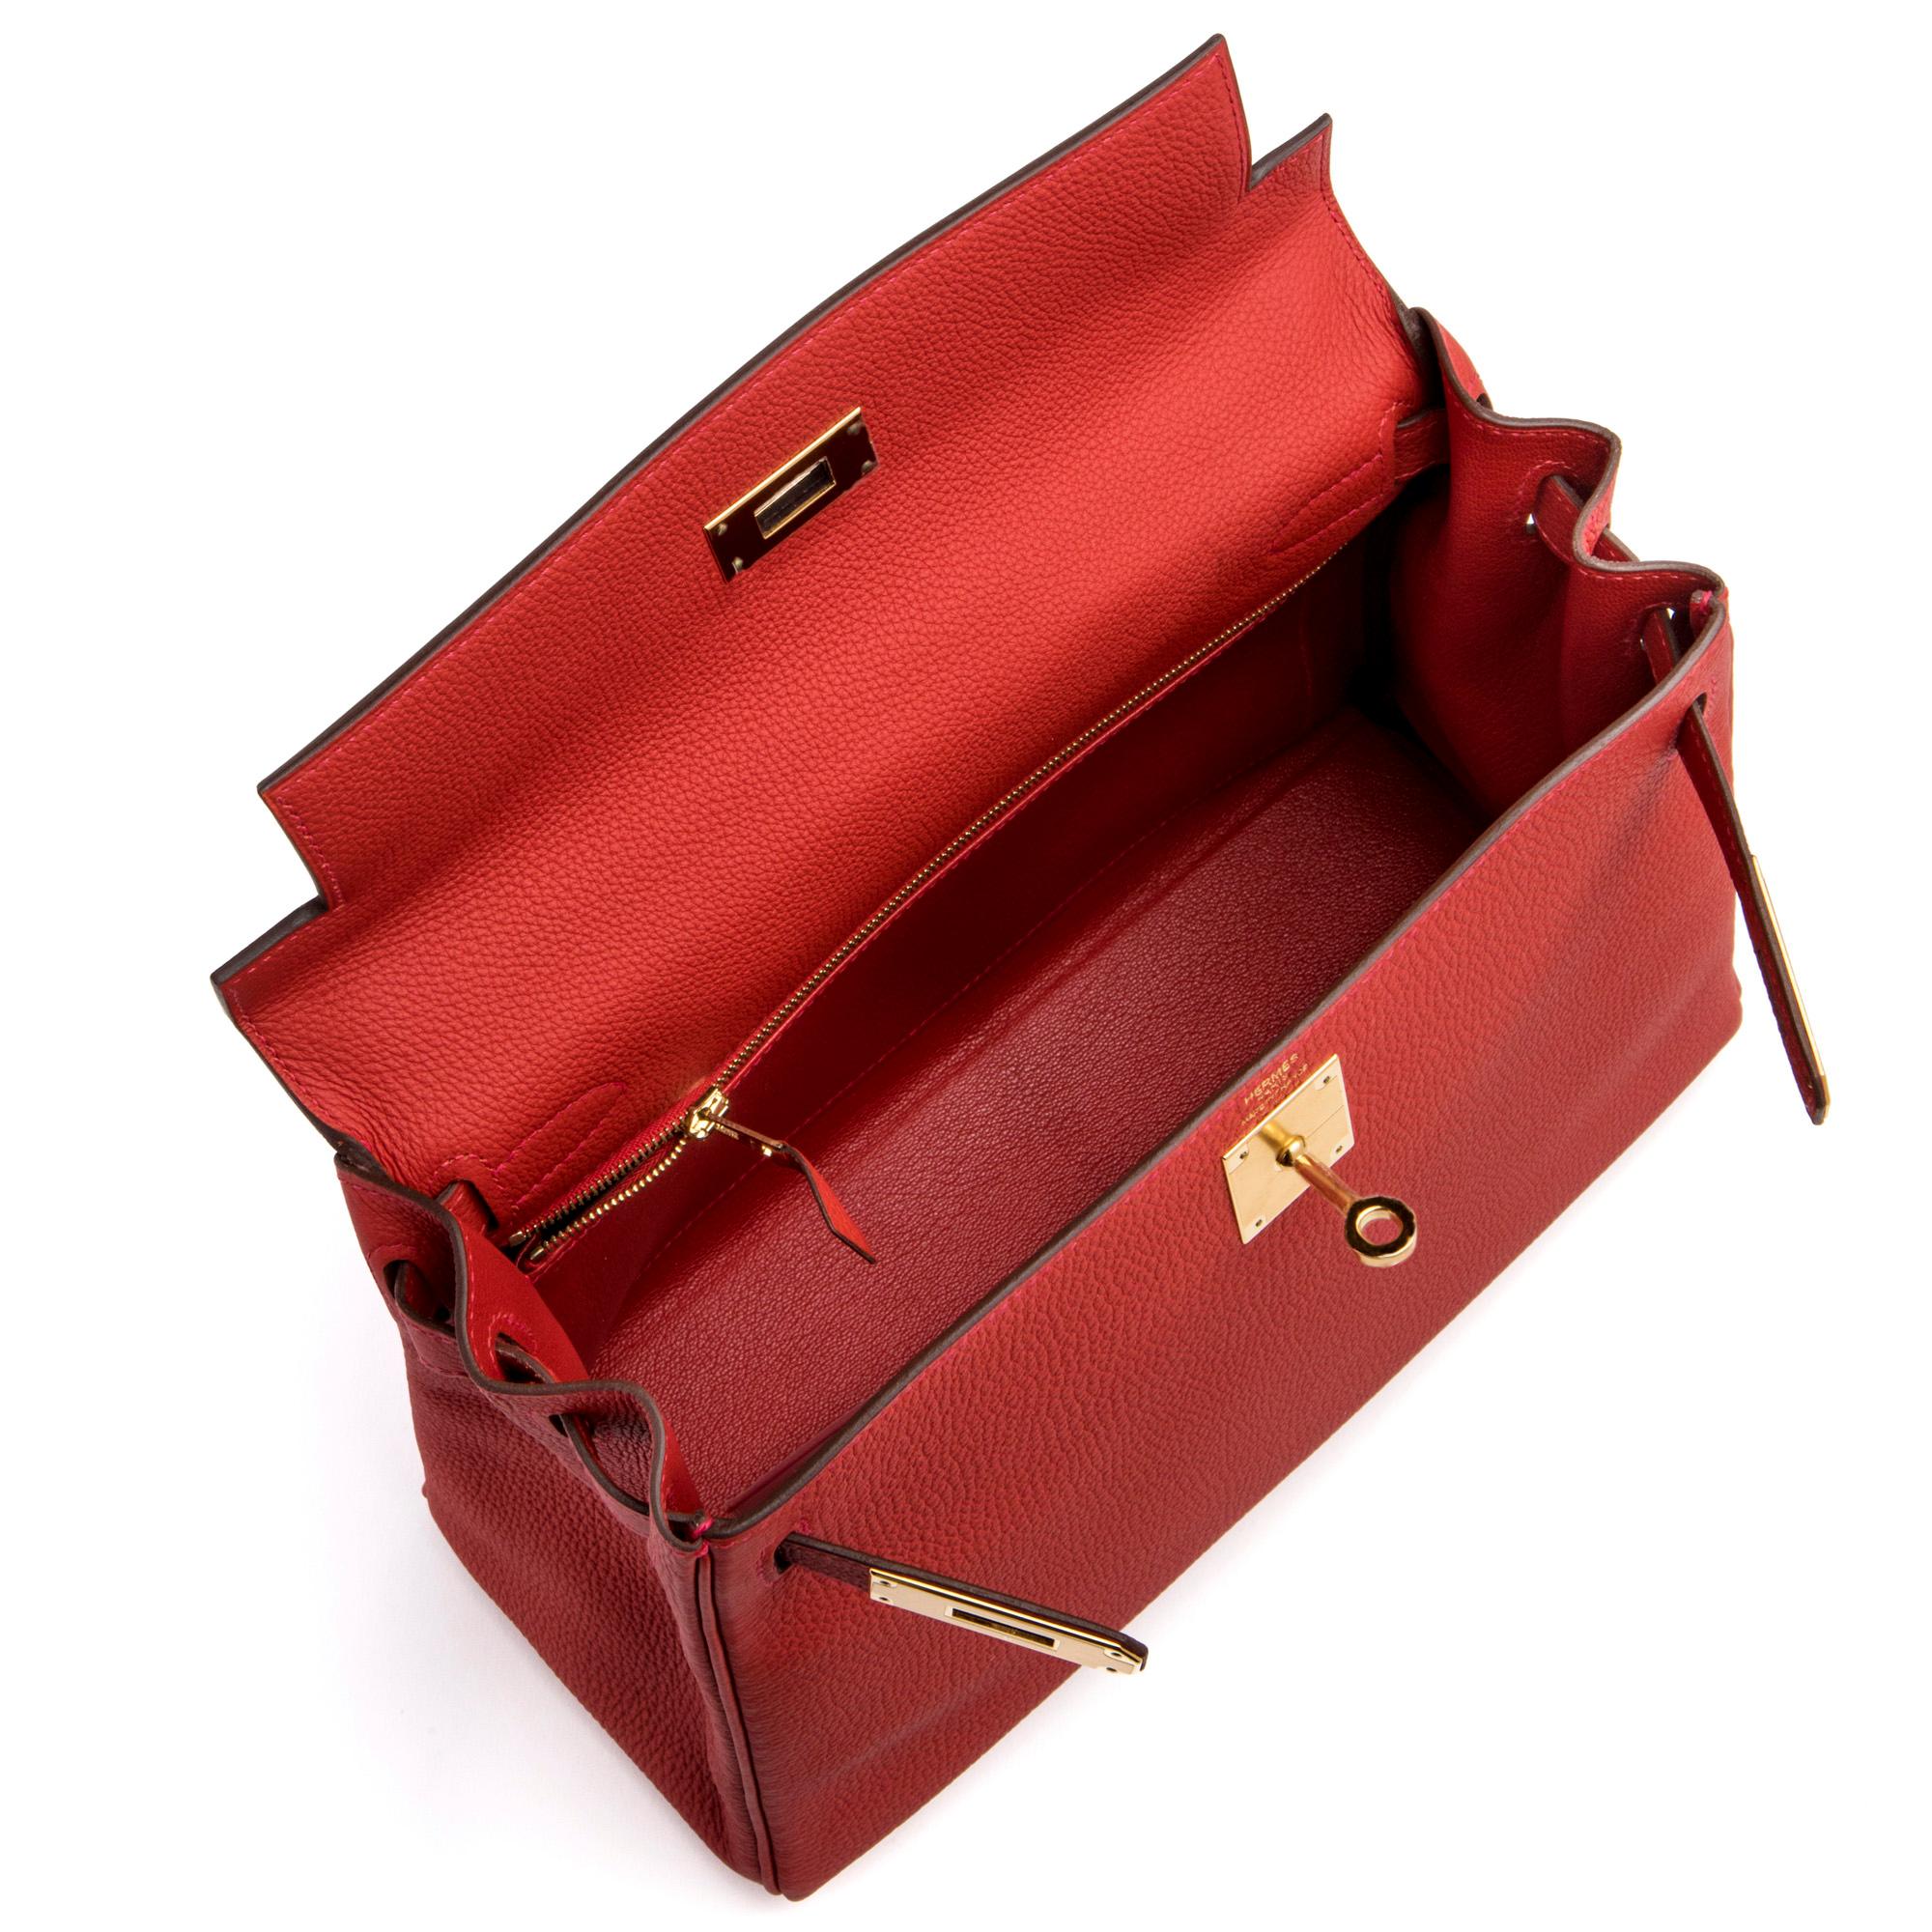 Hermés Retourne Geranium Kelly 28cm In Excellent Condition For Sale In New York, NY